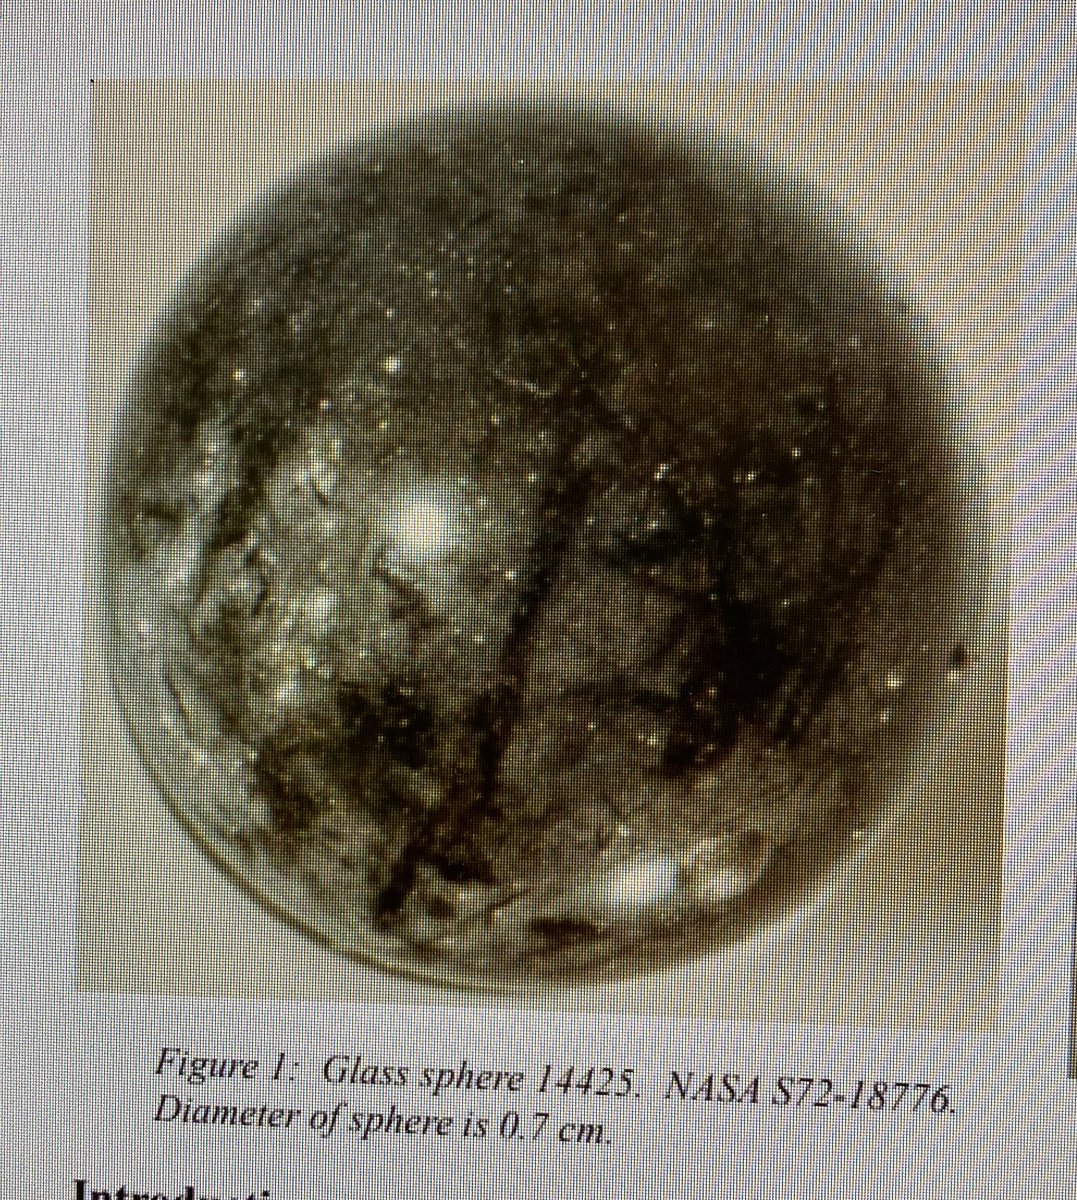 Just saw this singular glass sphere sample from Apollo 14 - although its diameter is not even 1cm, it looks like a beautiful planet/moon already 😍